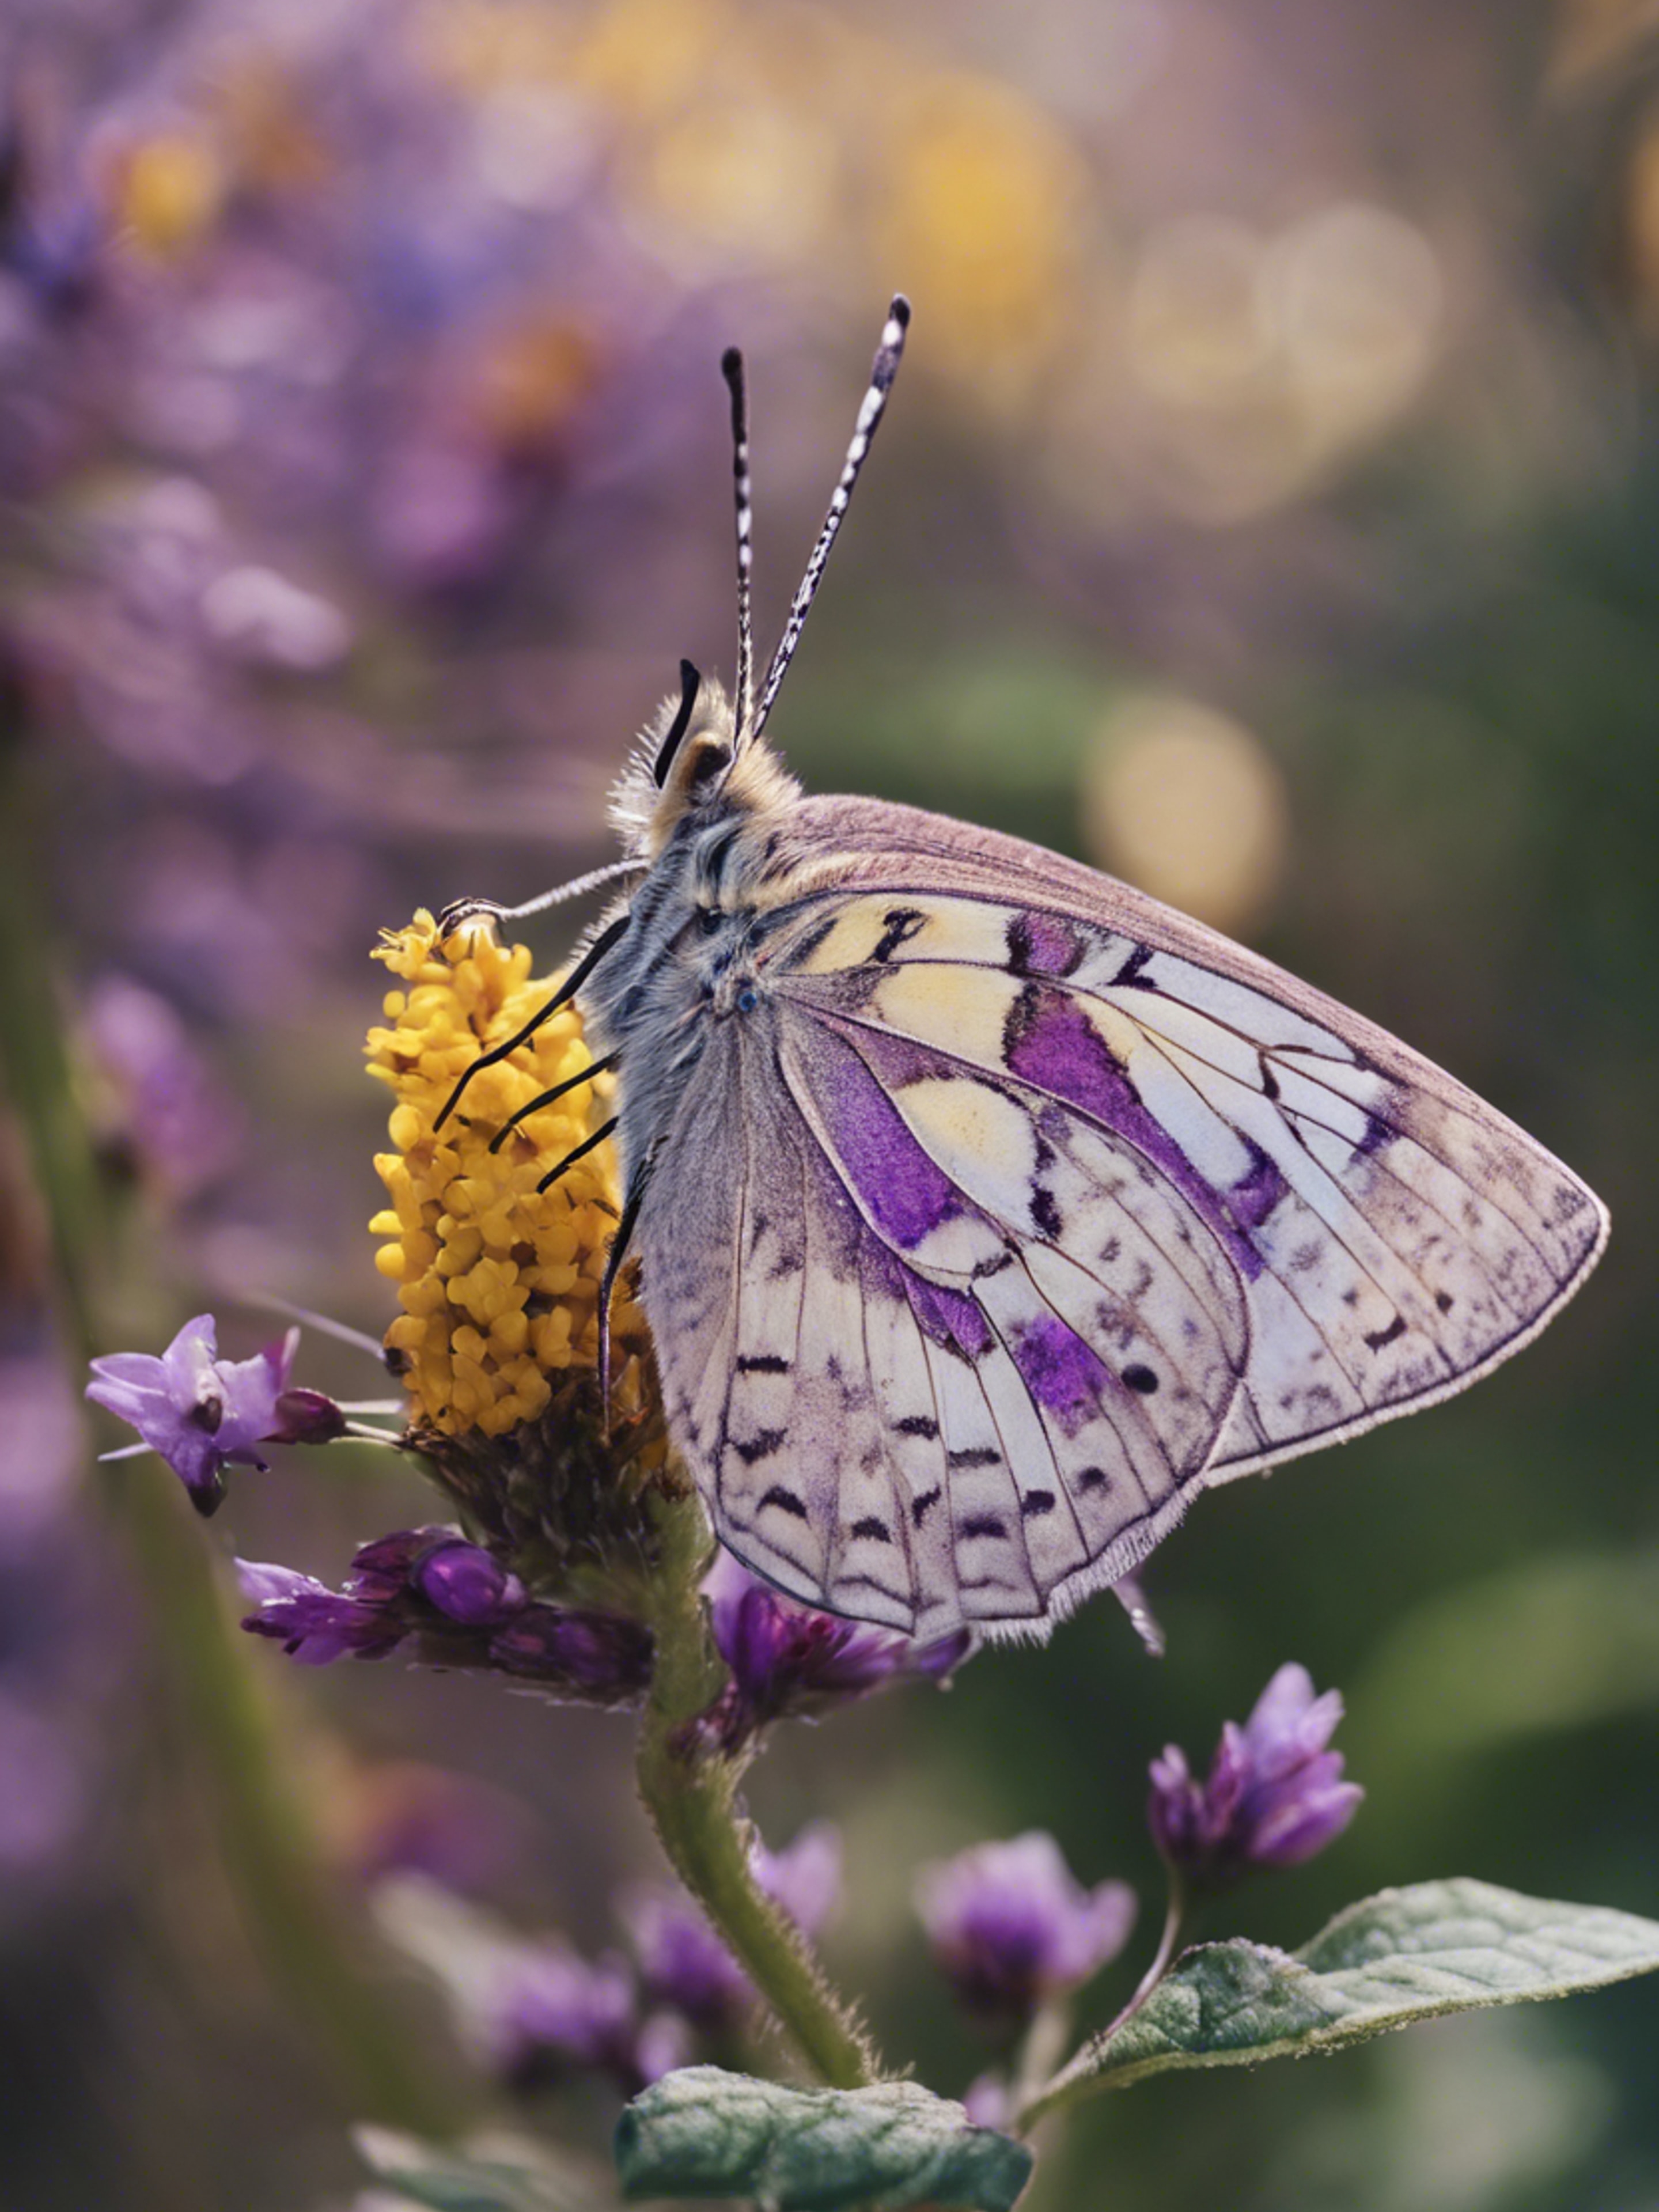 A beautiful butterfly with detailed purple and yellow wings resting on a blooming flower. Divar kağızı[3e976ae7be264a5da695]